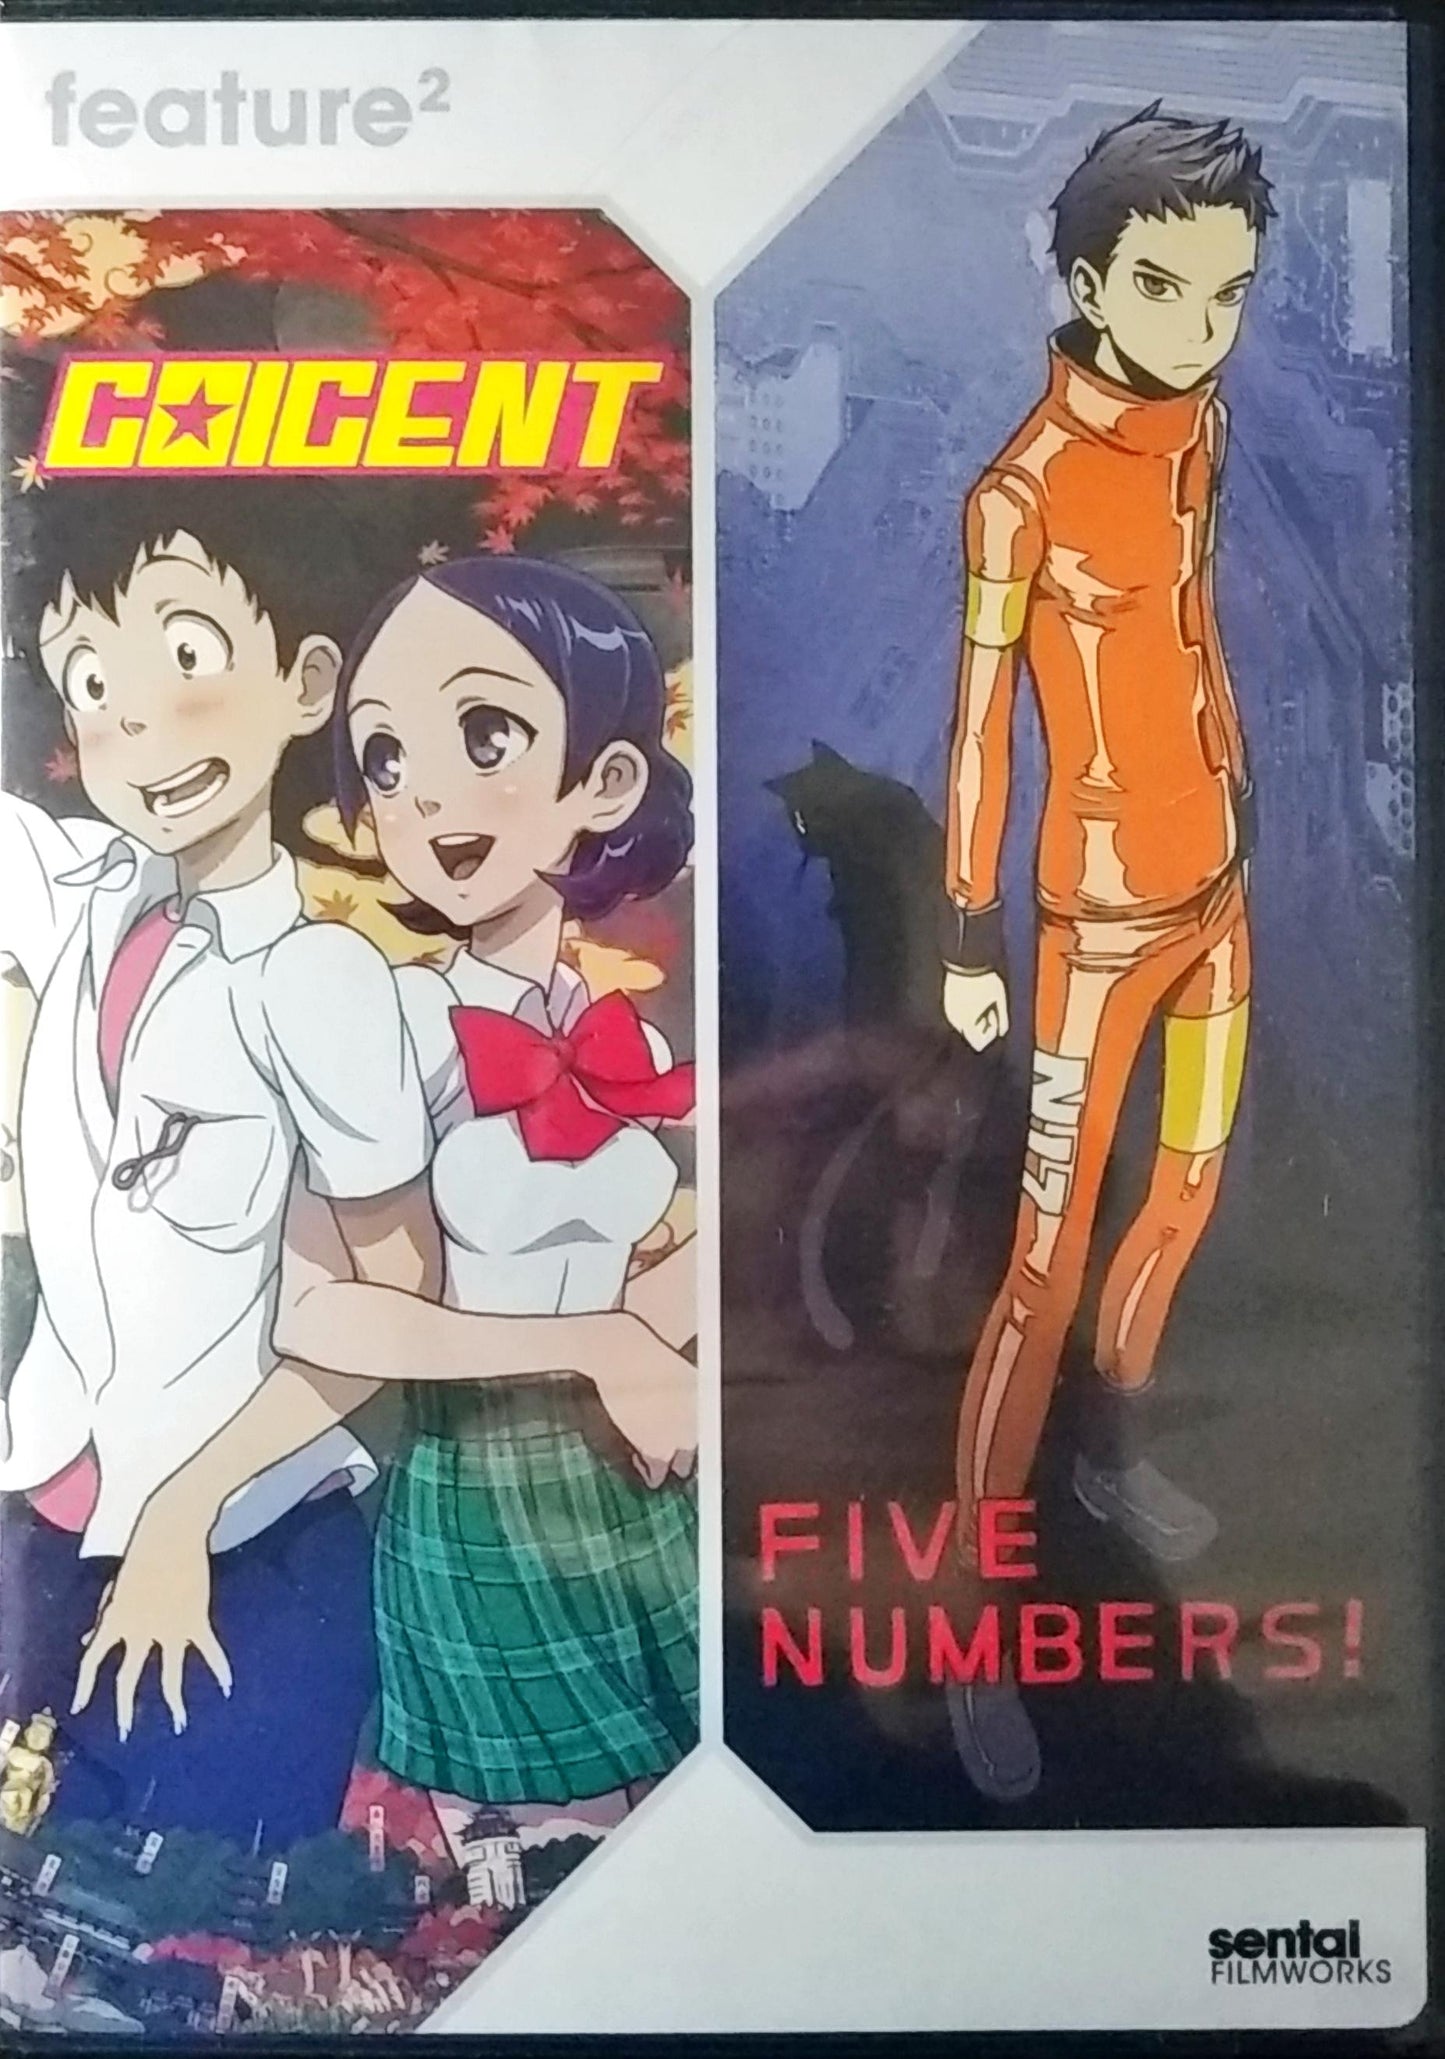 Coicent / Five Numbers! DVD Double Feature Sealed